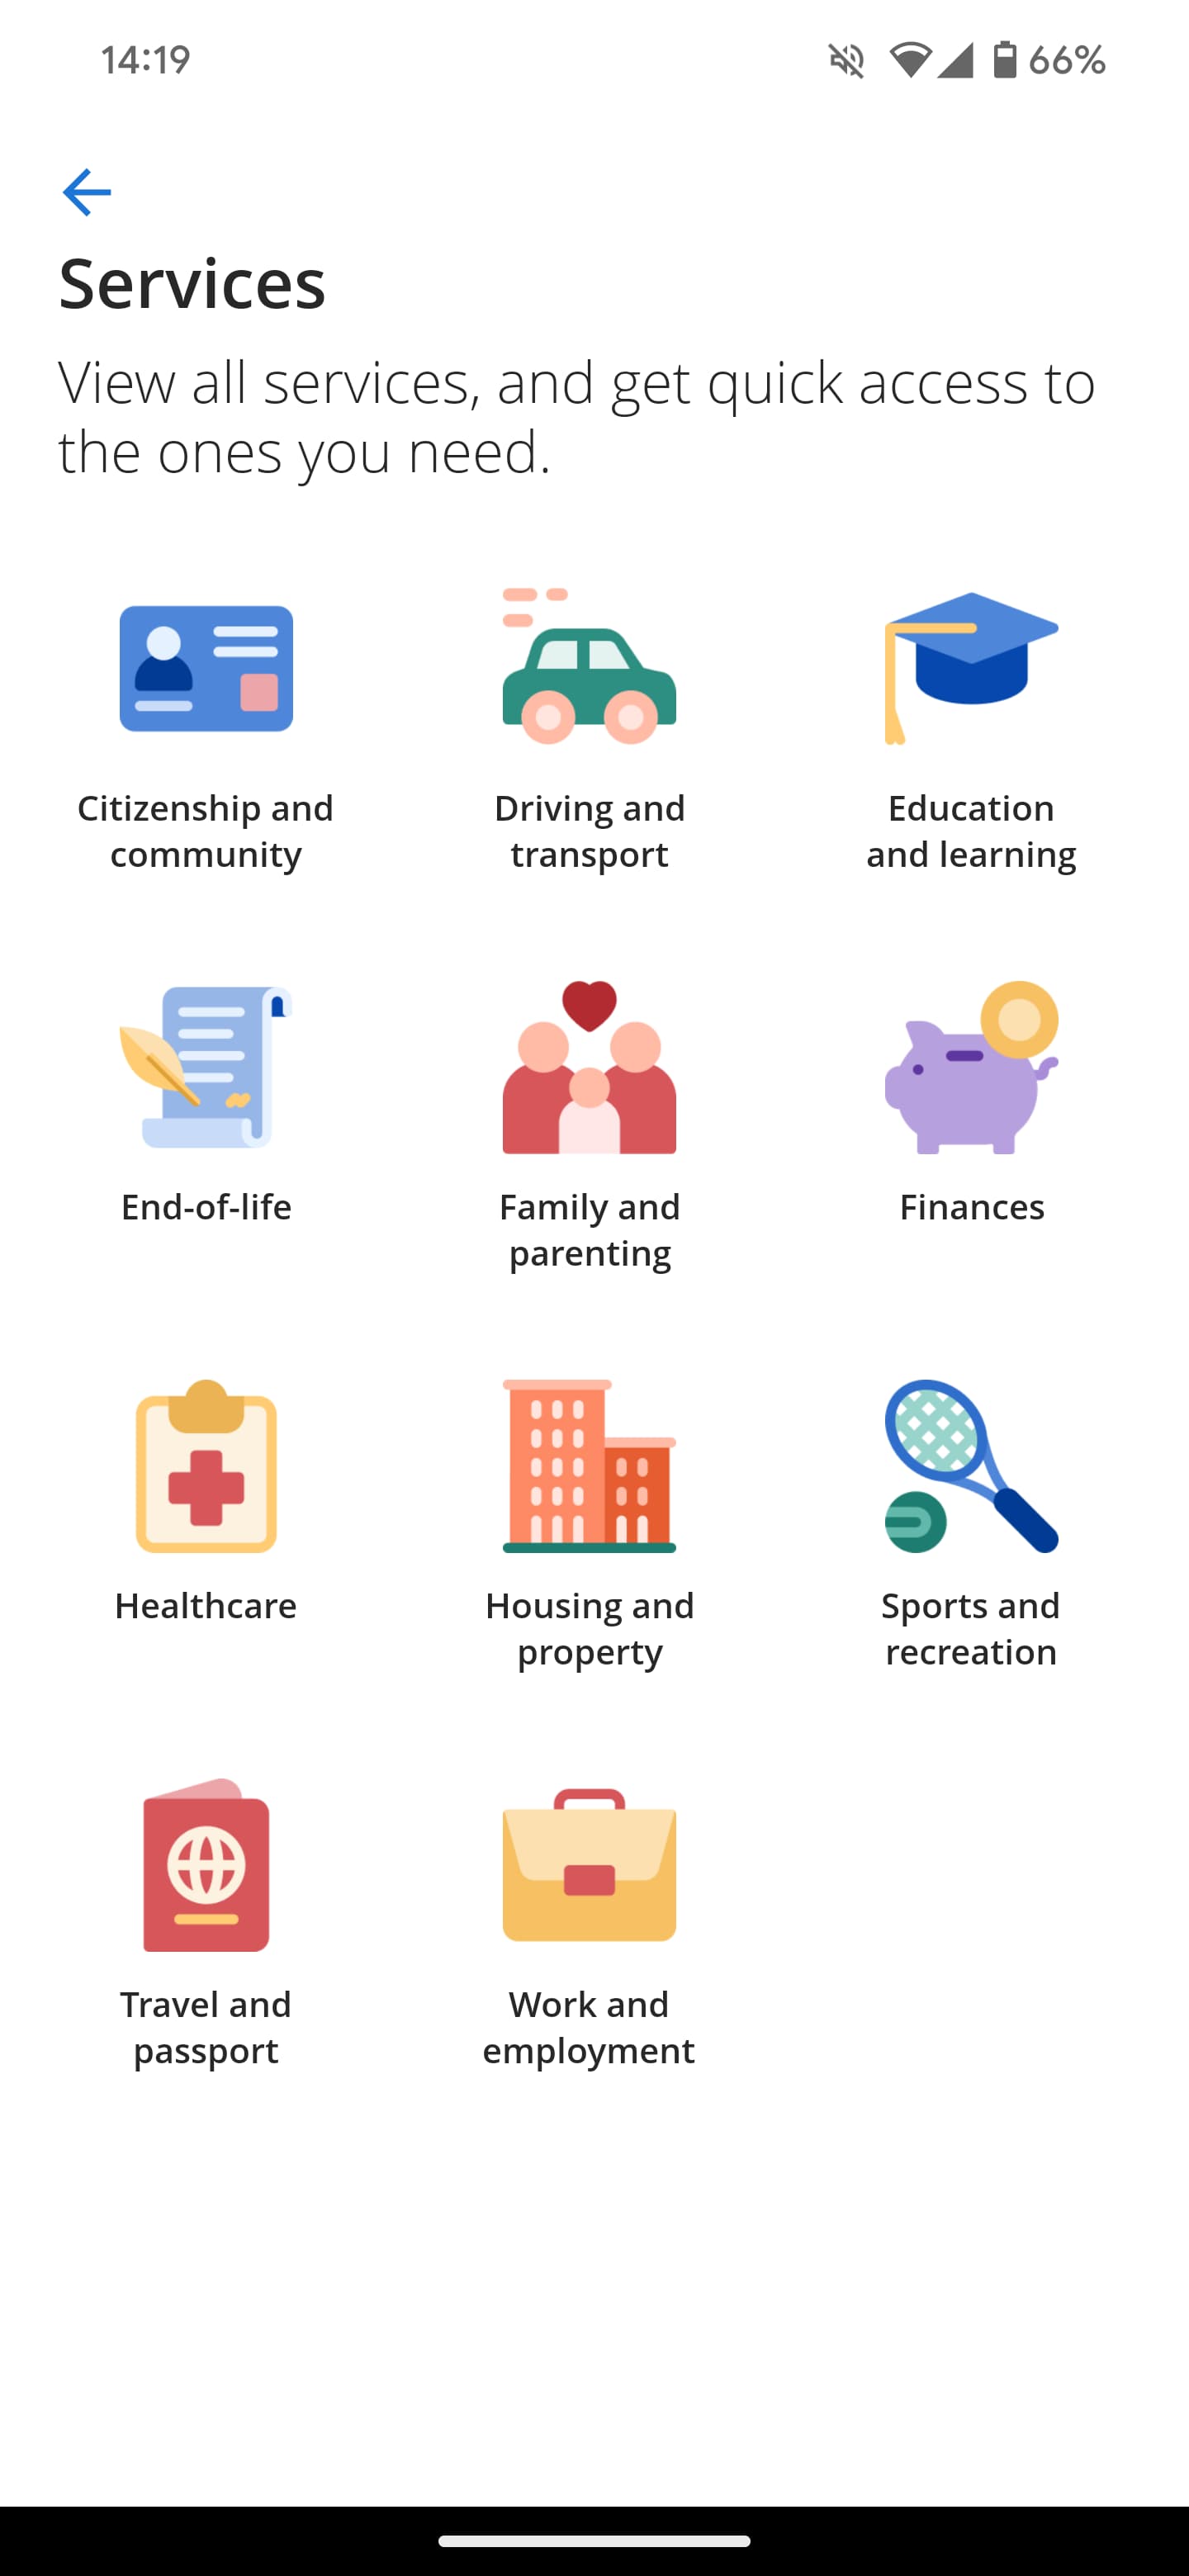 The LifeSG app offers you quick access to important government services